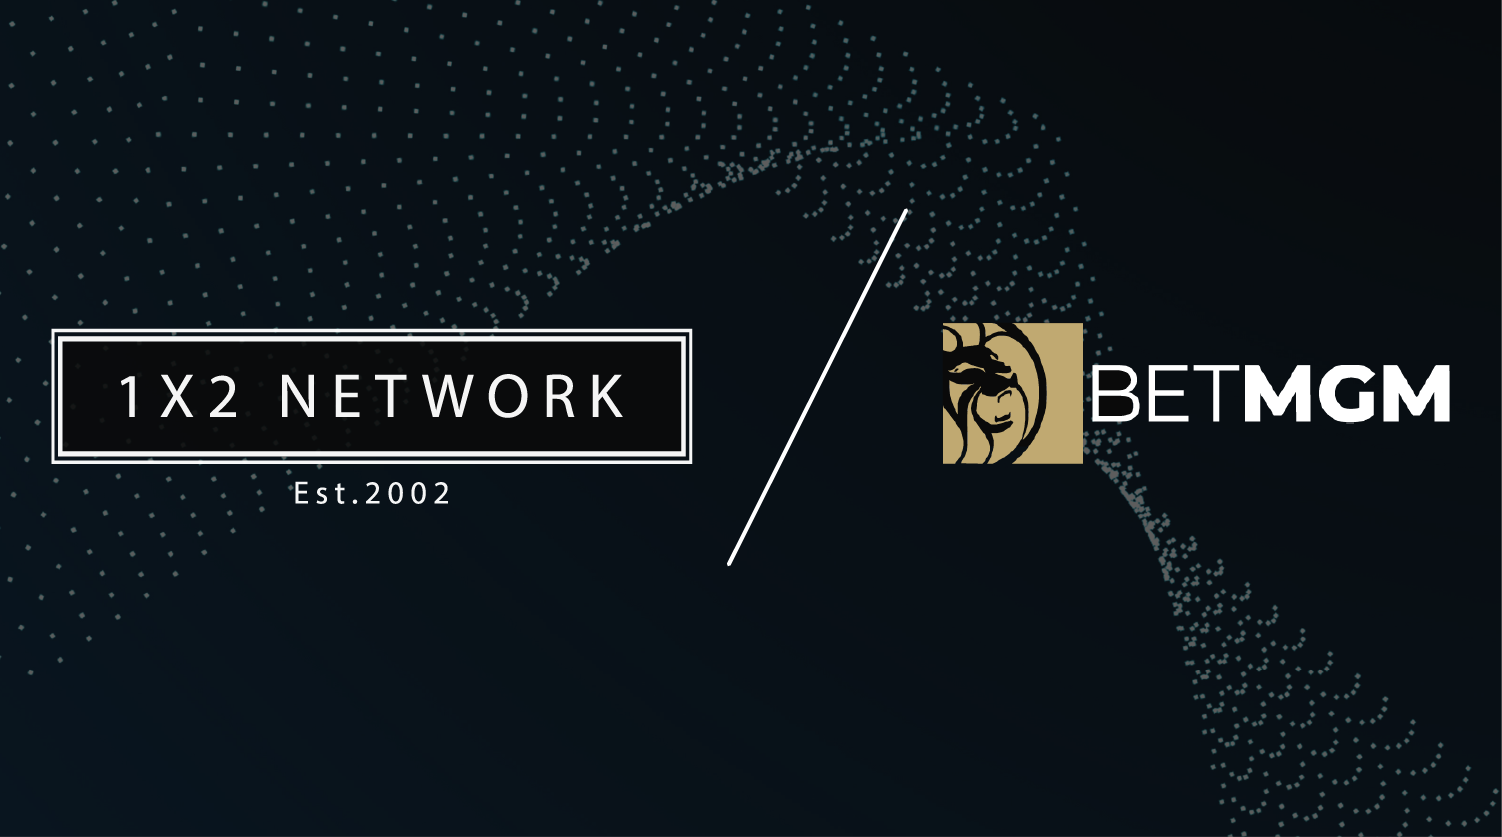 BetMGM To Rollout 1x2 Network Games Through New Partnership 